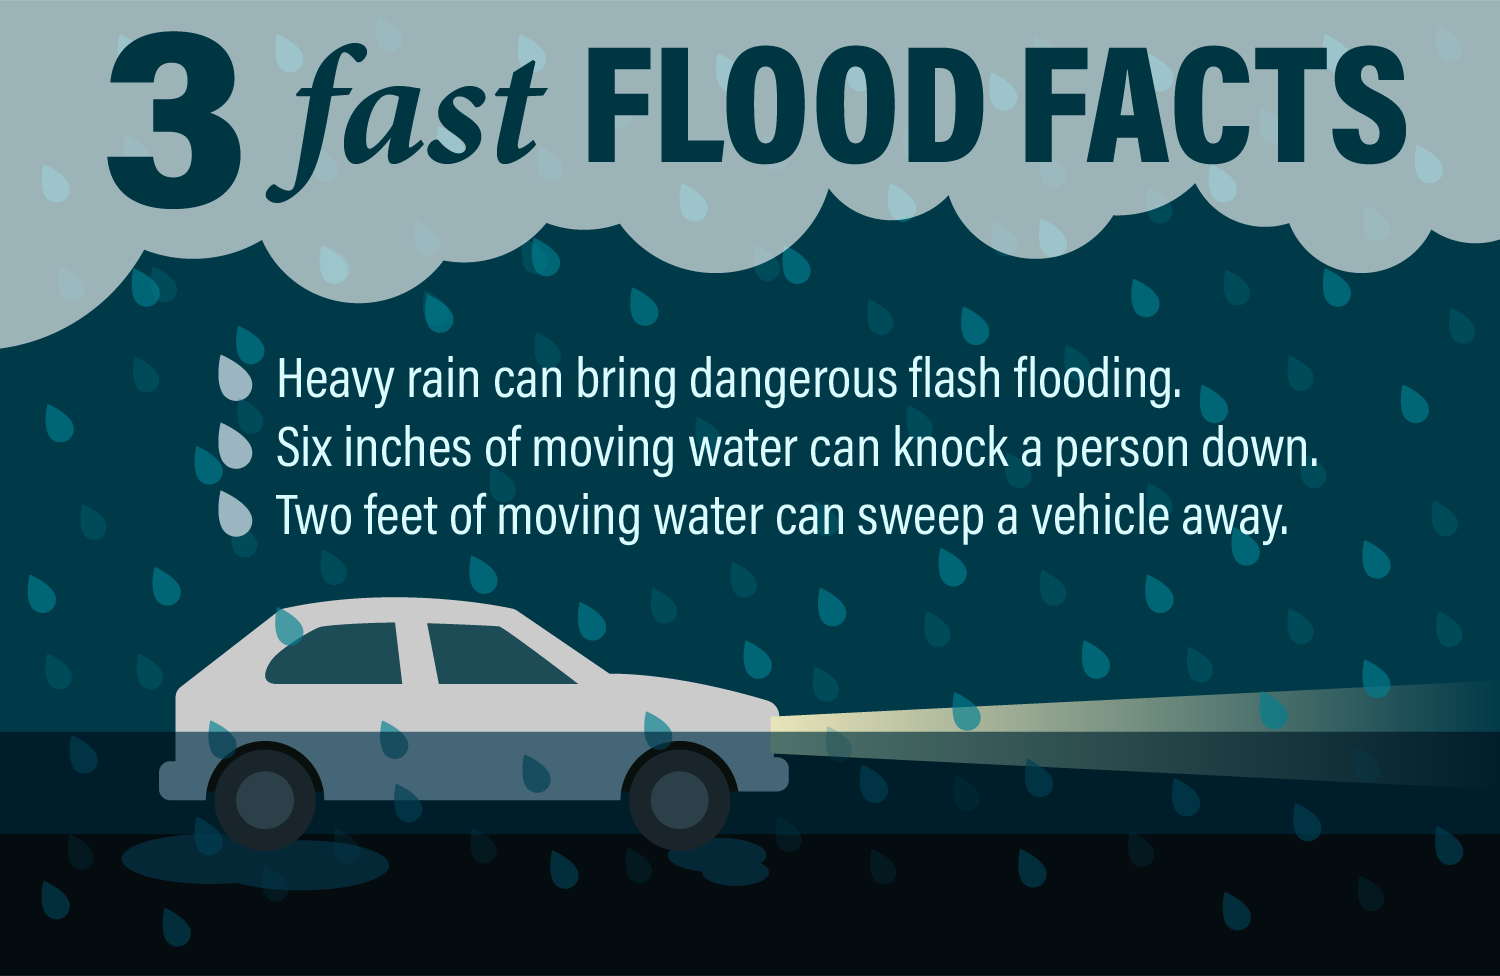 March is Flood Safety Month